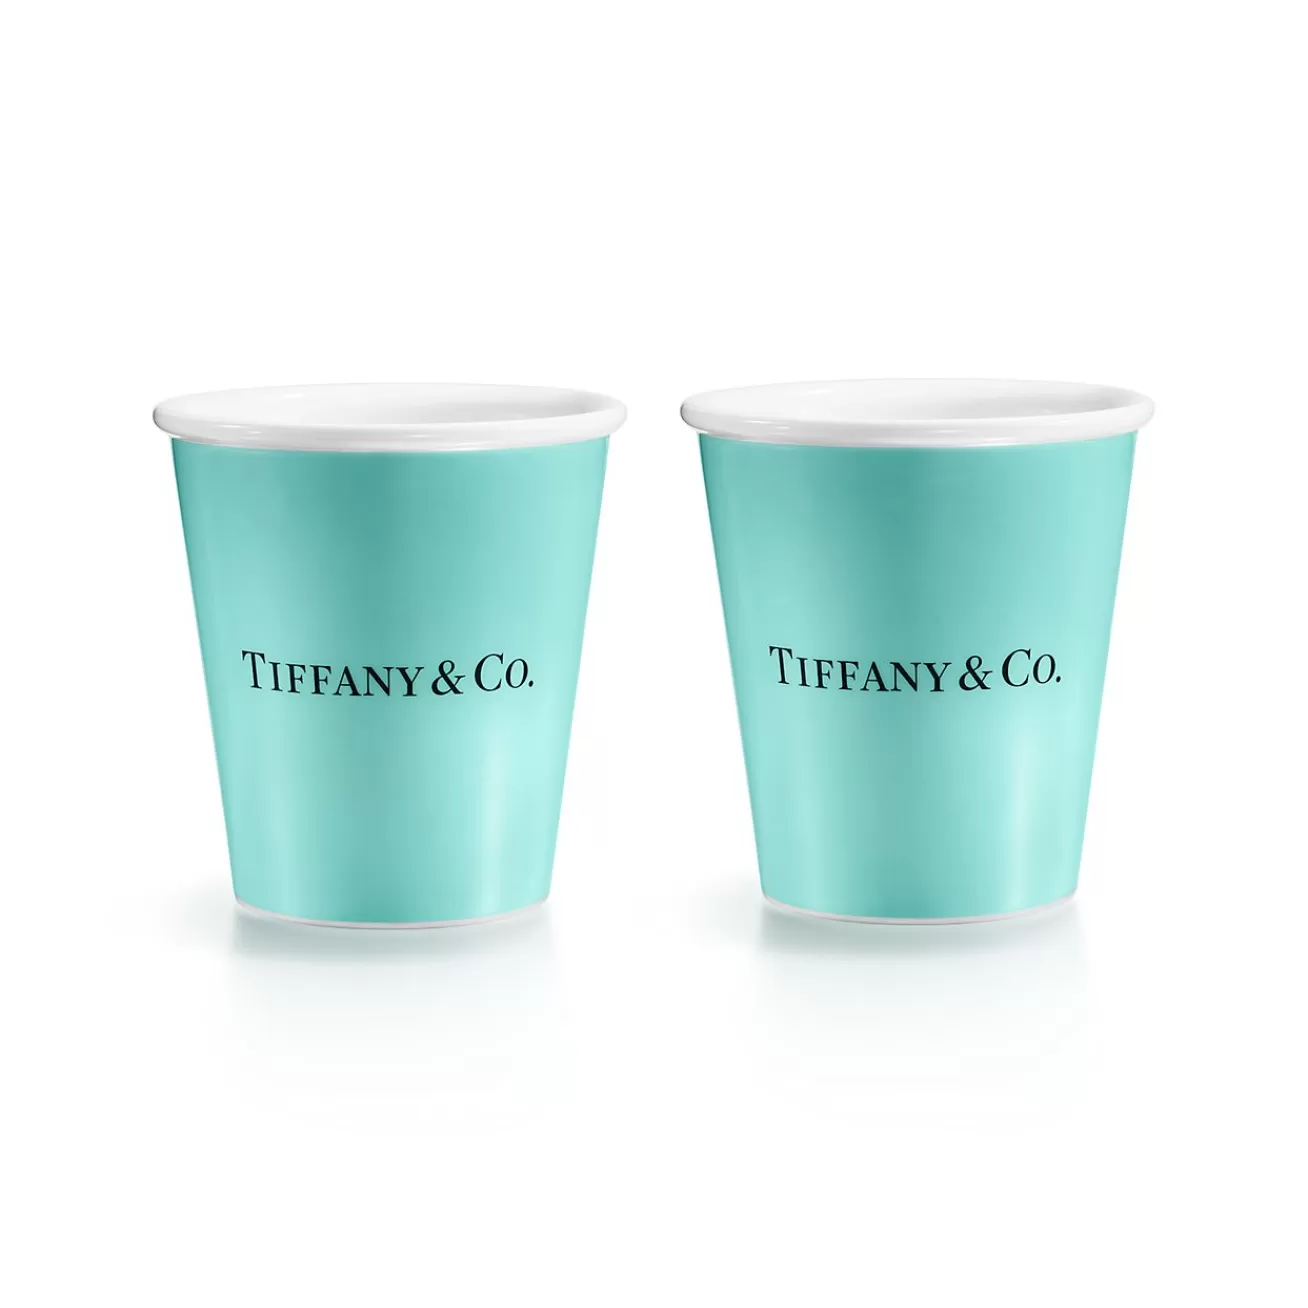 Tiffany & Co. Tiffany Cups Tiffany Coffee Cups in Bone China, Set of Two | ^ The Home | Housewarming Gifts